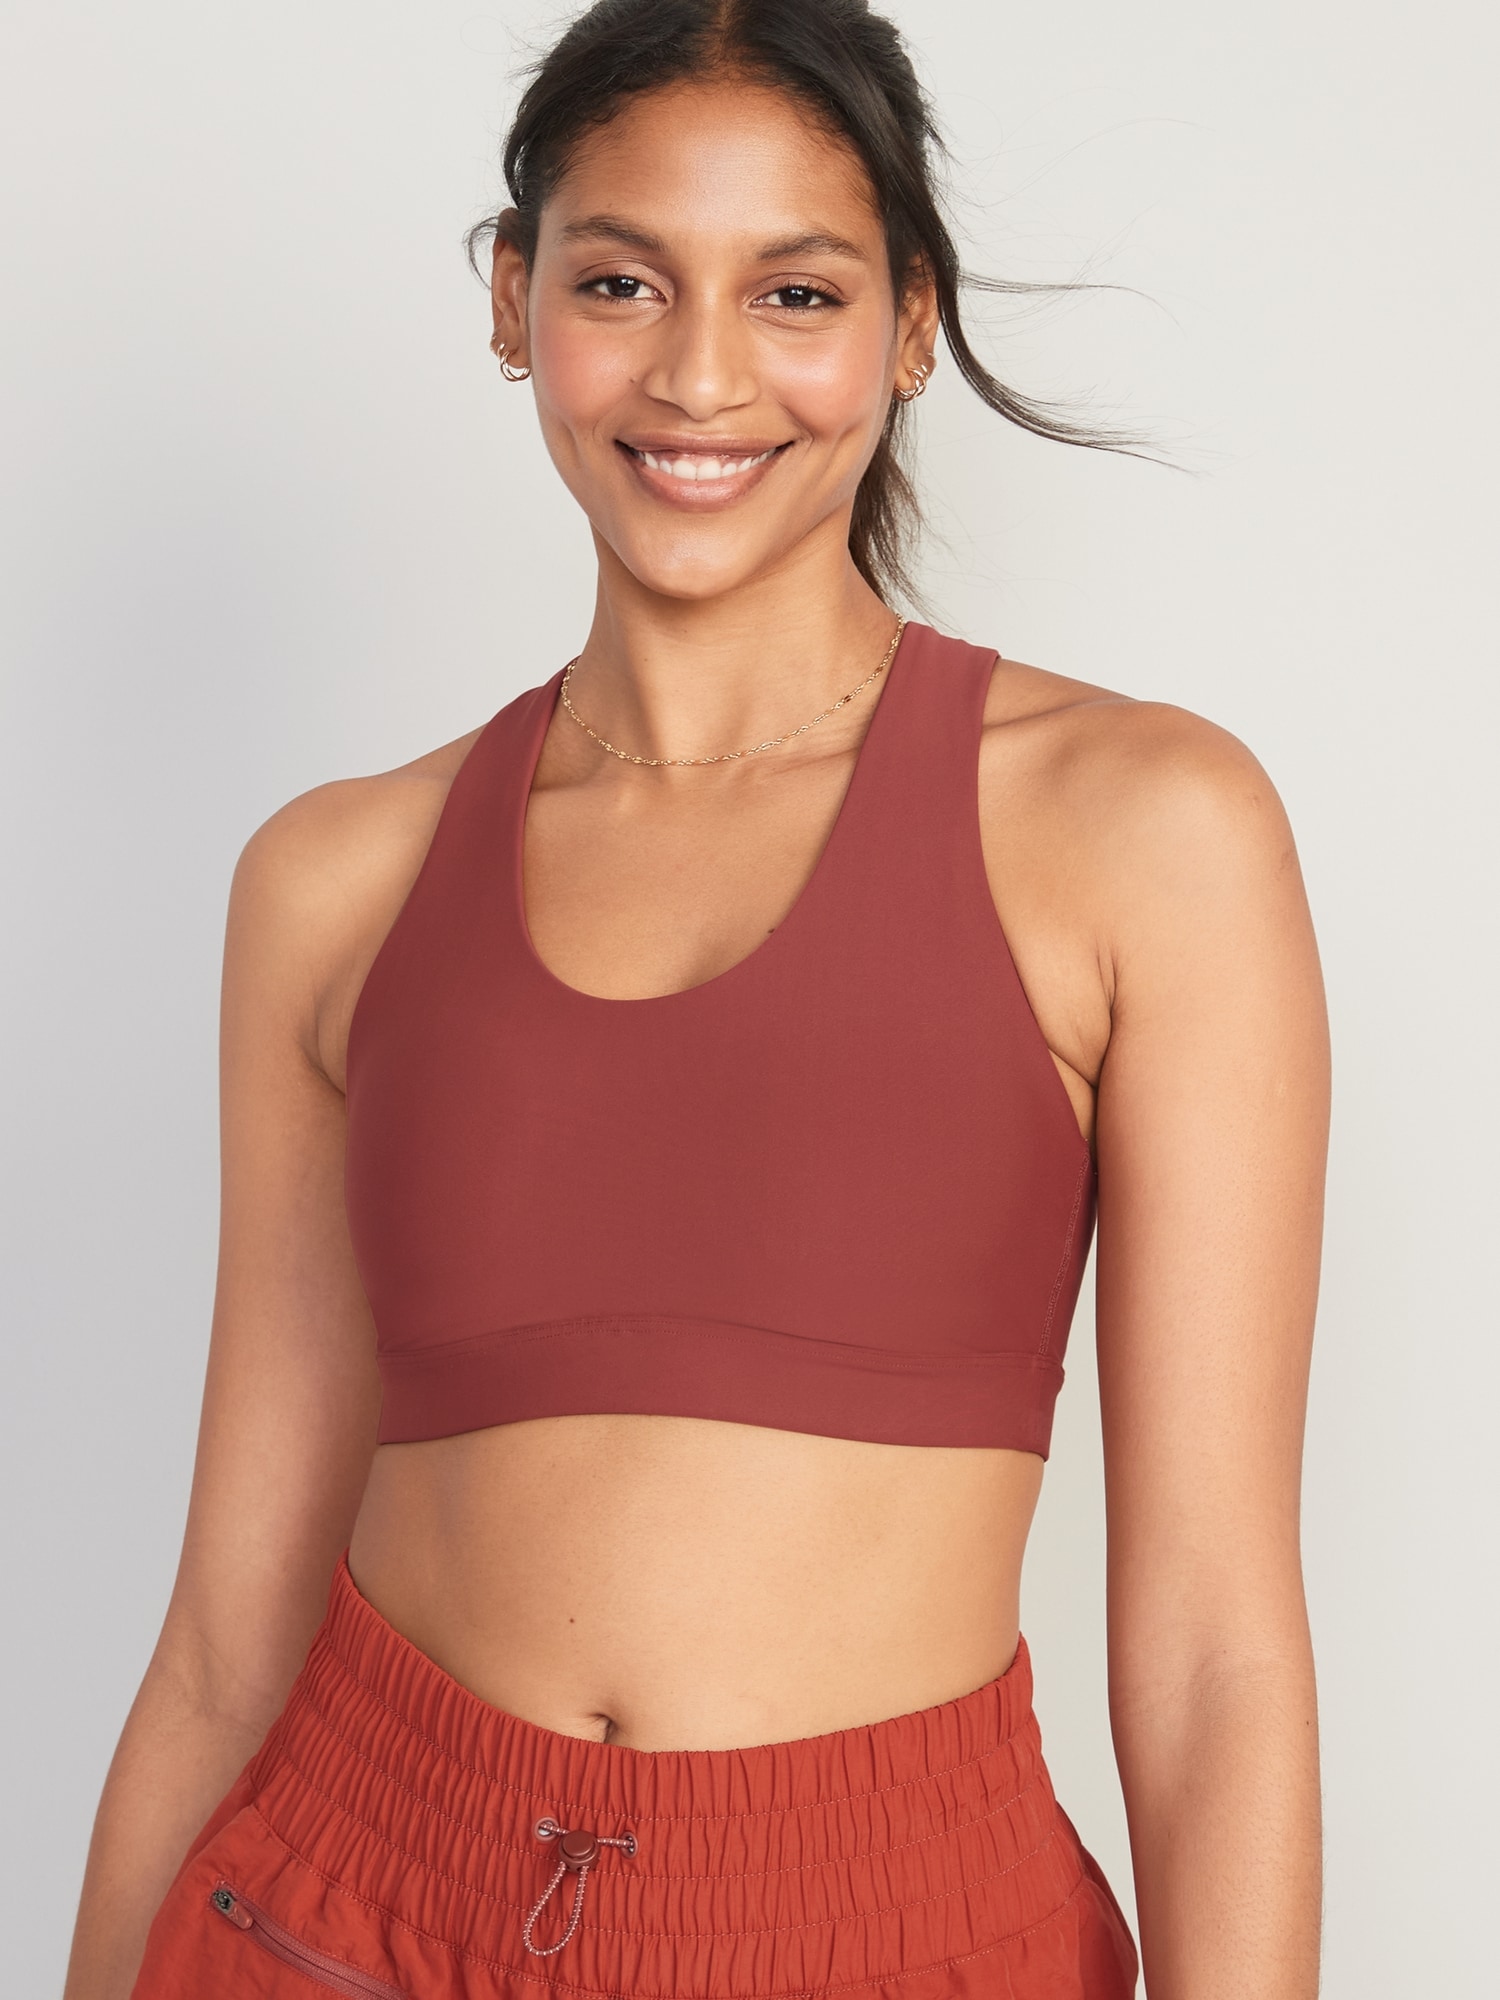 Old Navy Medium-Support PowerSoft Strappy Sports Bra for Women 2X